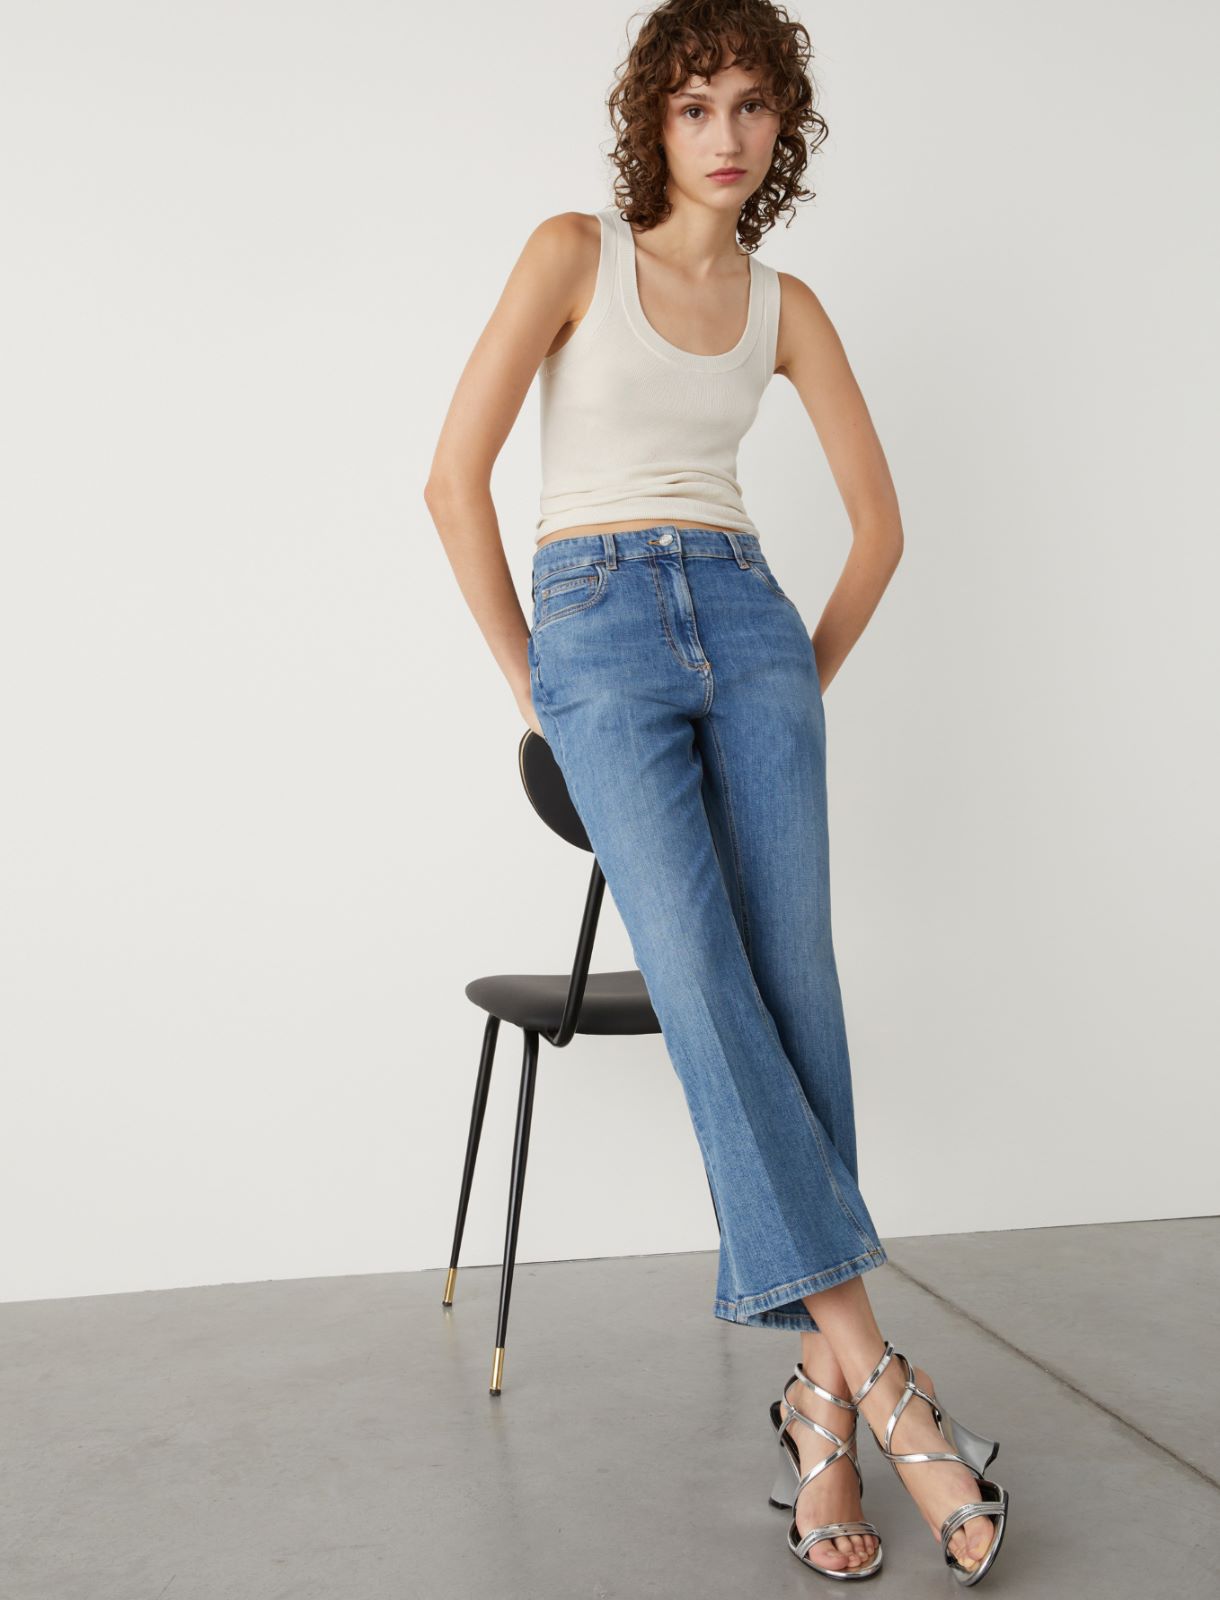 Jeans flare - Blue jeans - Marella - 3